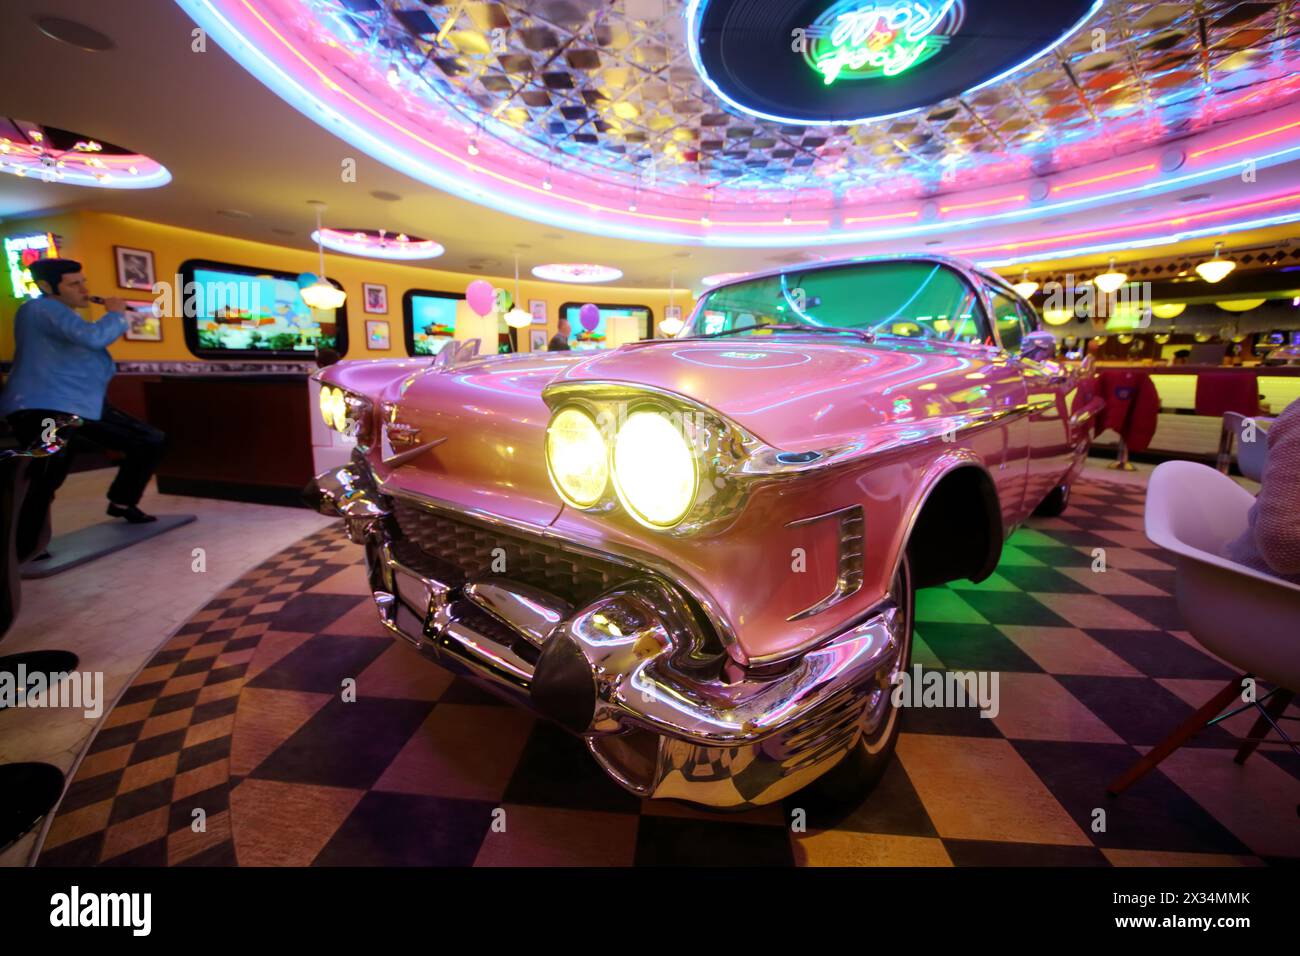 RUSSIAN, MOSCOW - JAN 18, 2015: Beverly Hills Diner restaurant with pink Cadillac in the middle. Stock Photo